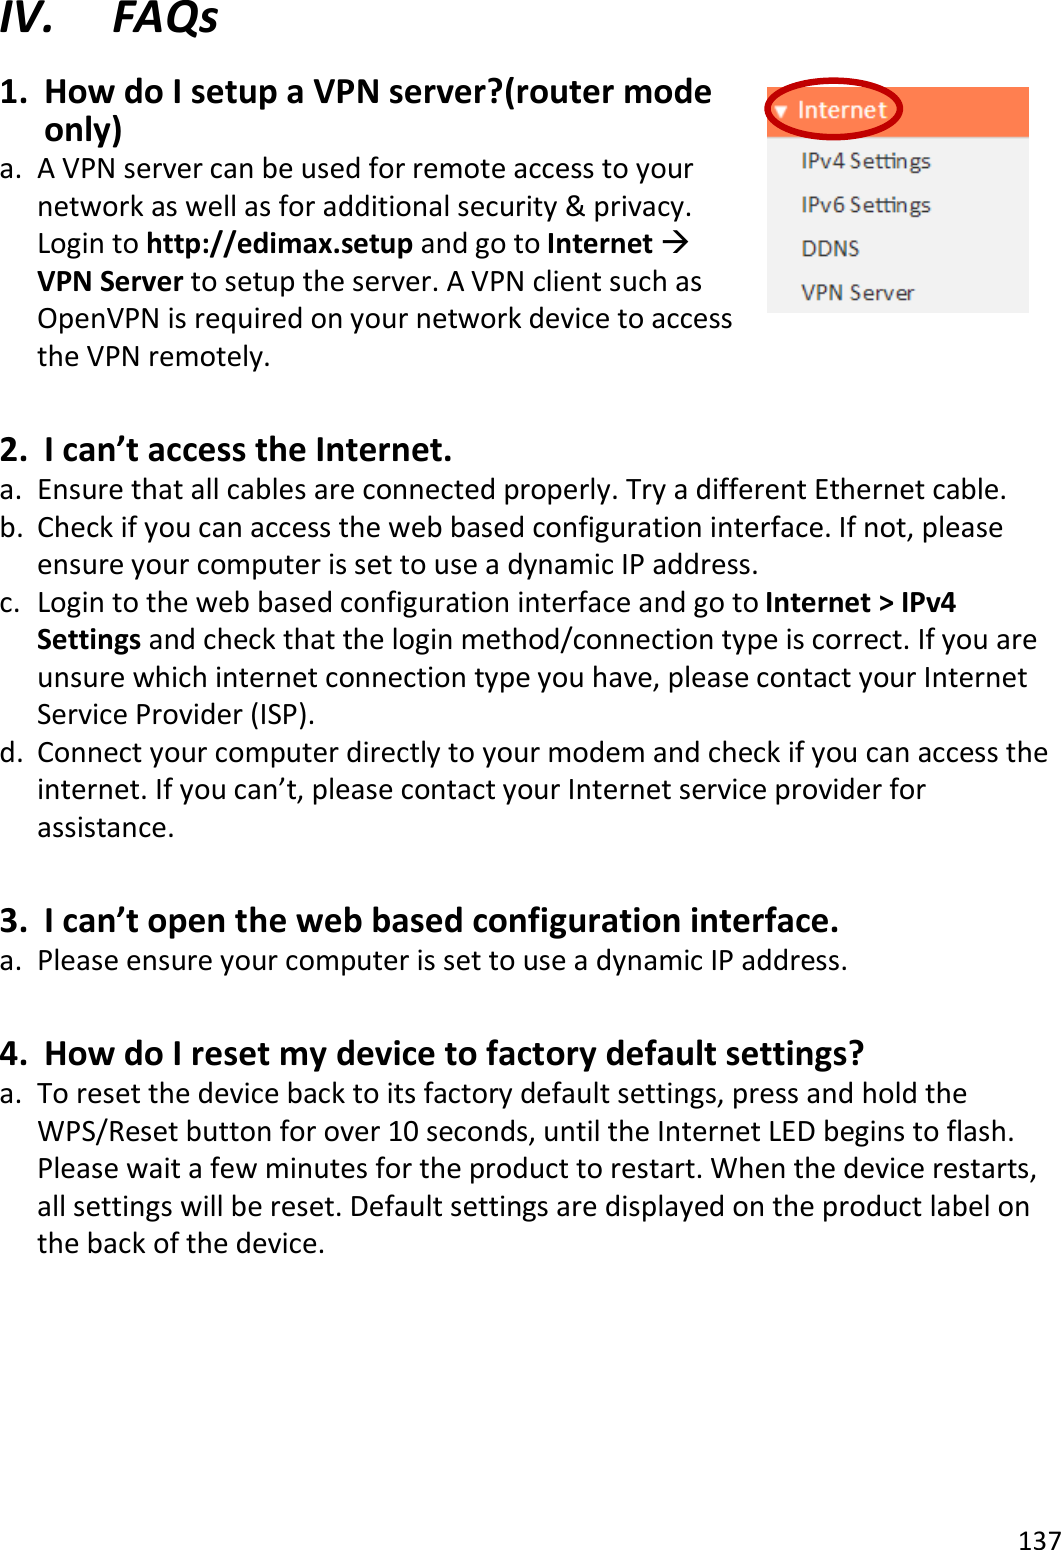 137  IV. FAQs 1. How do I setup a VPN server?(router mode only) a. A VPN server can be used for remote access to your network as well as for additional security &amp; privacy. Login to http://edimax.setup and go to Internet  VPN Server to setup the server. A VPN client such as OpenVPN is required on your network device to access the VPN remotely.   2. I can’t access the Internet. a. Ensure that all cables are connected properly. Try a different Ethernet cable. b. Check if you can access the web based configuration interface. If not, please ensure your computer is set to use a dynamic IP address. c. Login to the web based configuration interface and go to Internet &gt; IPv4 Settings and check that the login method/connection type is correct. If you are unsure which internet connection type you have, please contact your Internet Service Provider (ISP). d. Connect your computer directly to your modem and check if you can access the internet. If you can’t, please contact your Internet service provider for assistance.  3. I can’t open the web based configuration interface. a. Please ensure your computer is set to use a dynamic IP address.  4. How do I reset my device to factory default settings? a. To reset the device back to its factory default settings, press and hold the WPS/Reset button for over 10 seconds, until the Internet LED begins to flash. Please wait a few minutes for the product to restart. When the device restarts, all settings will be reset. Default settings are displayed on the product label on the back of the device.         